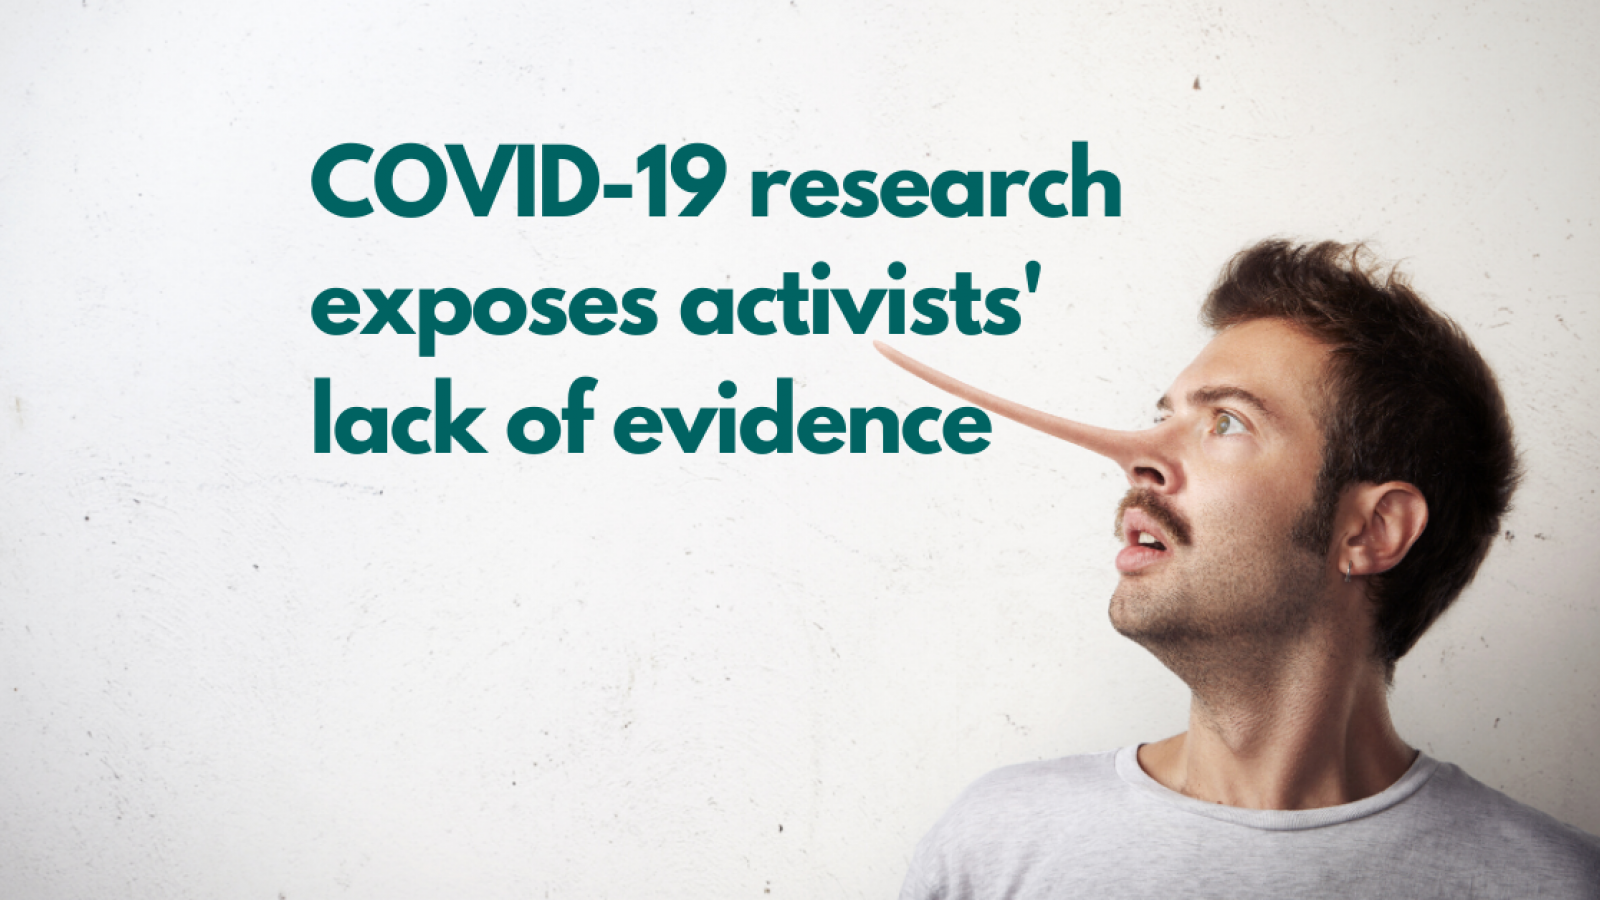 COVID-19 research exposes activists' lack of evidence